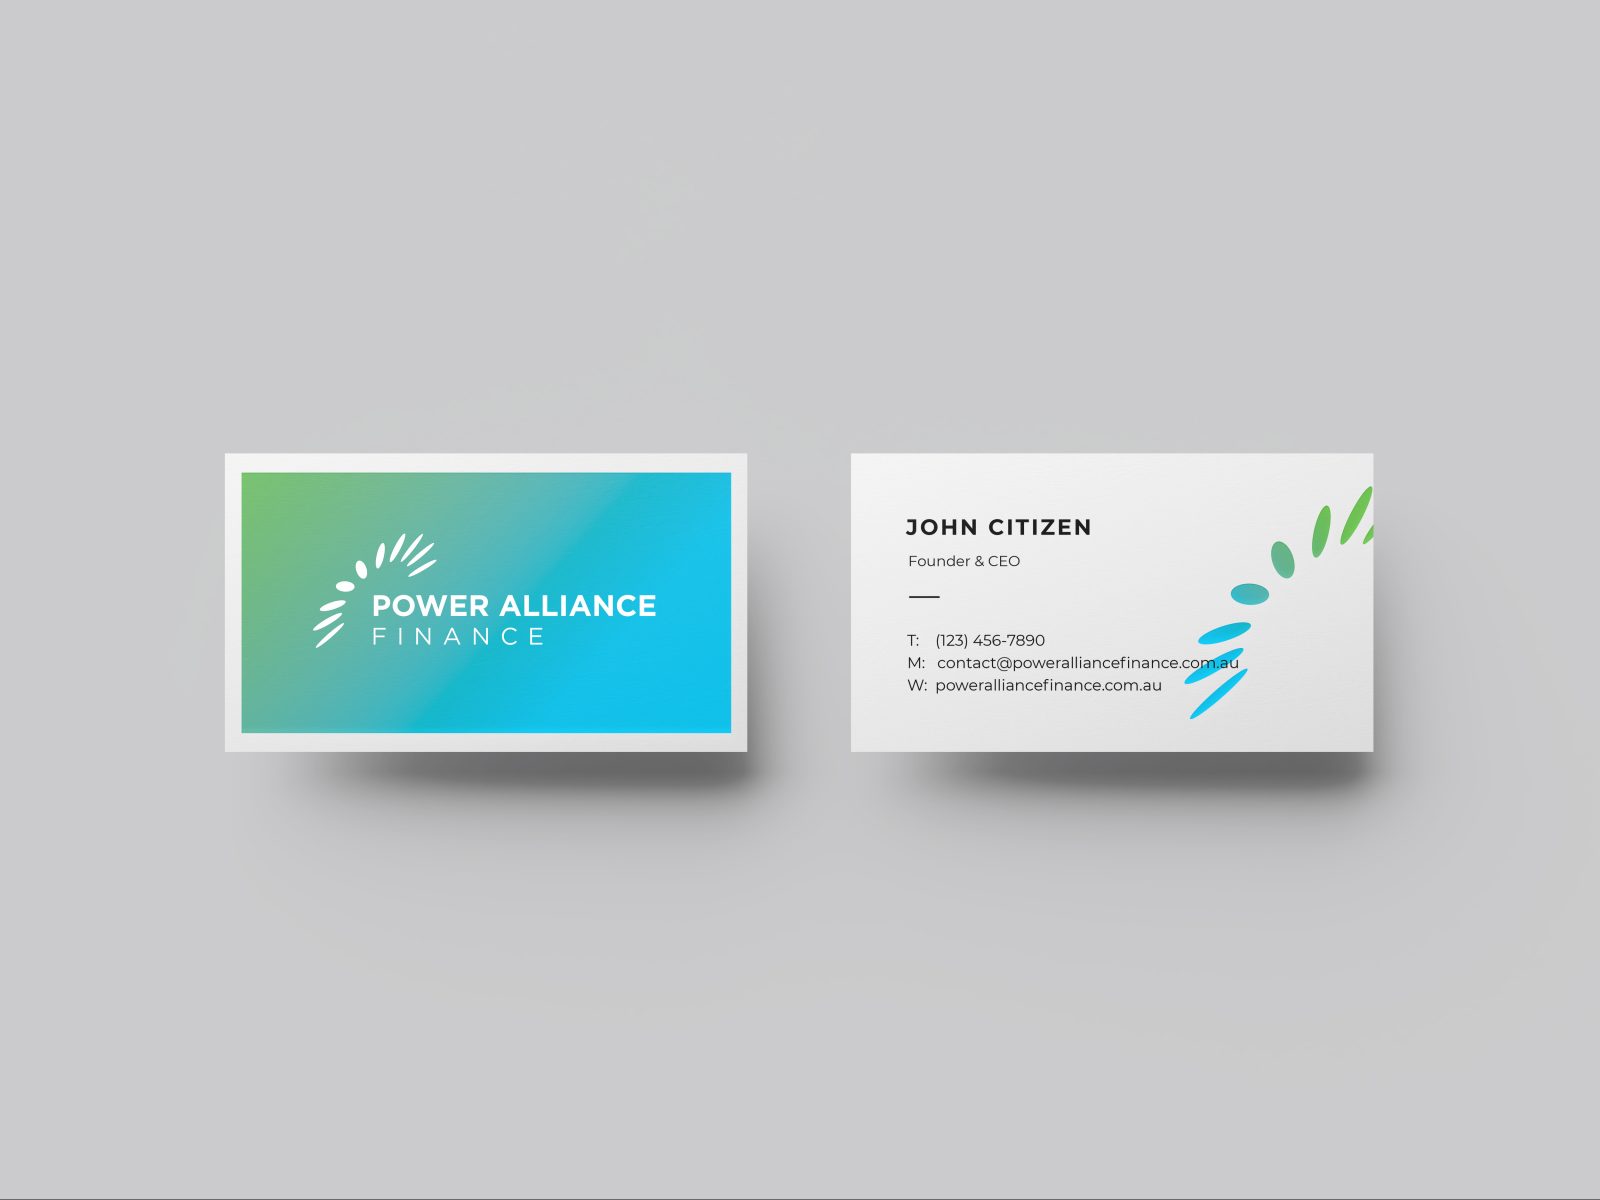 cards of founder & CEO of Power Alliance company